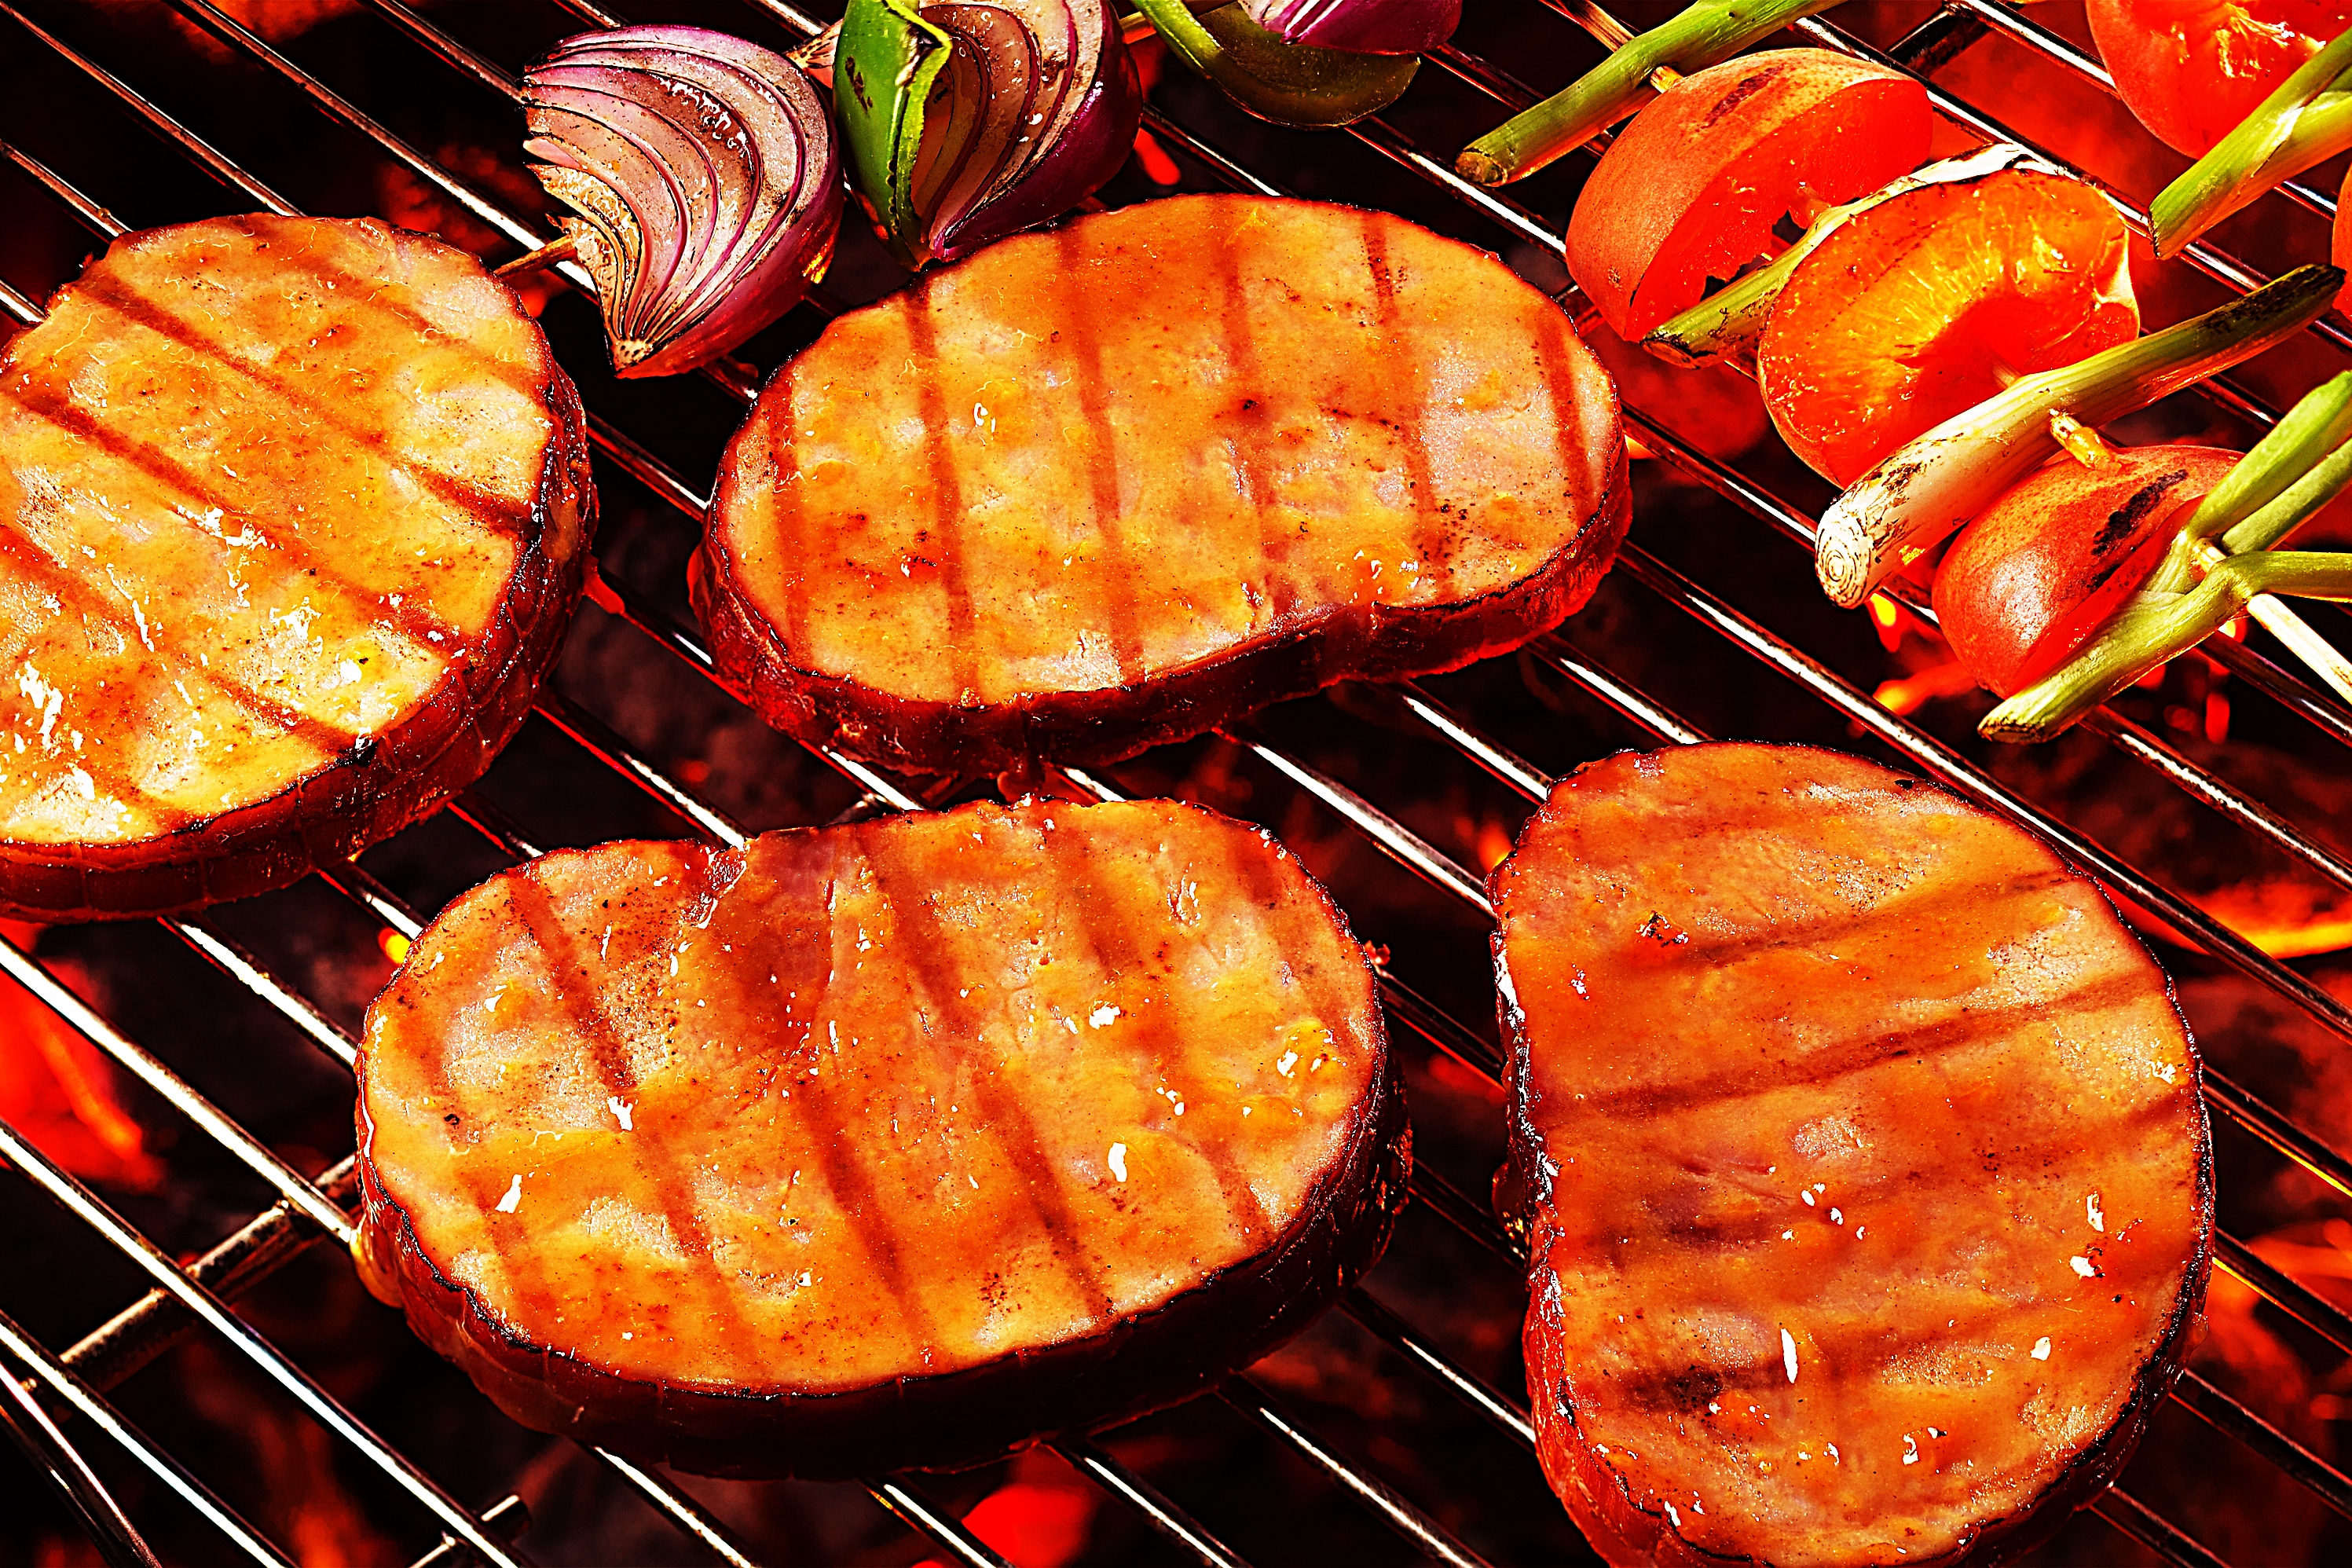 Stupid-Easy Recipe for Grilled Ham Steaks with Apricot Glaze (#1 Top-Rated)